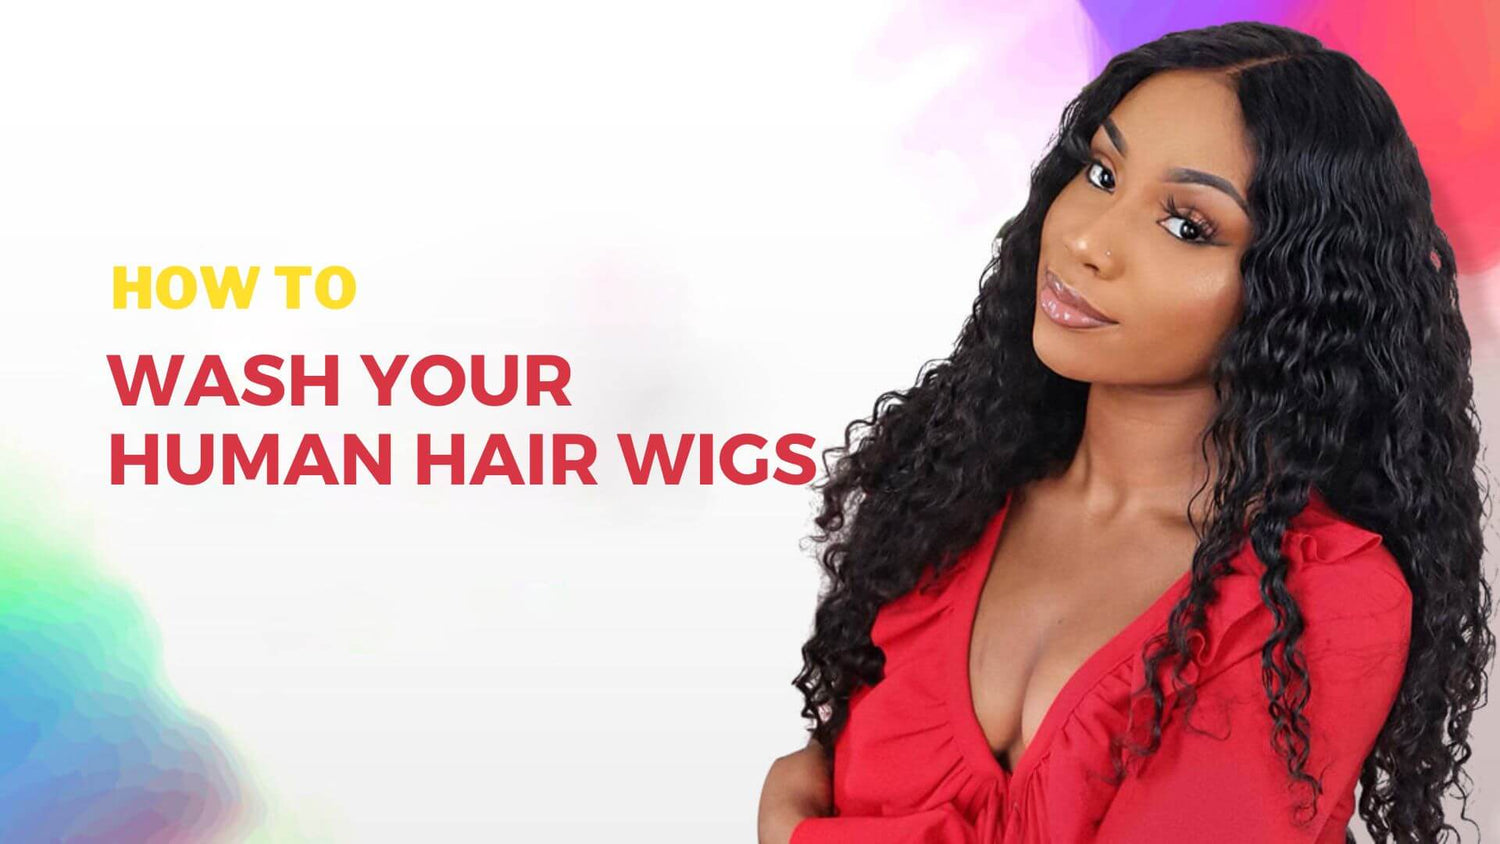 How to Wash Your Human Hair Wigs?